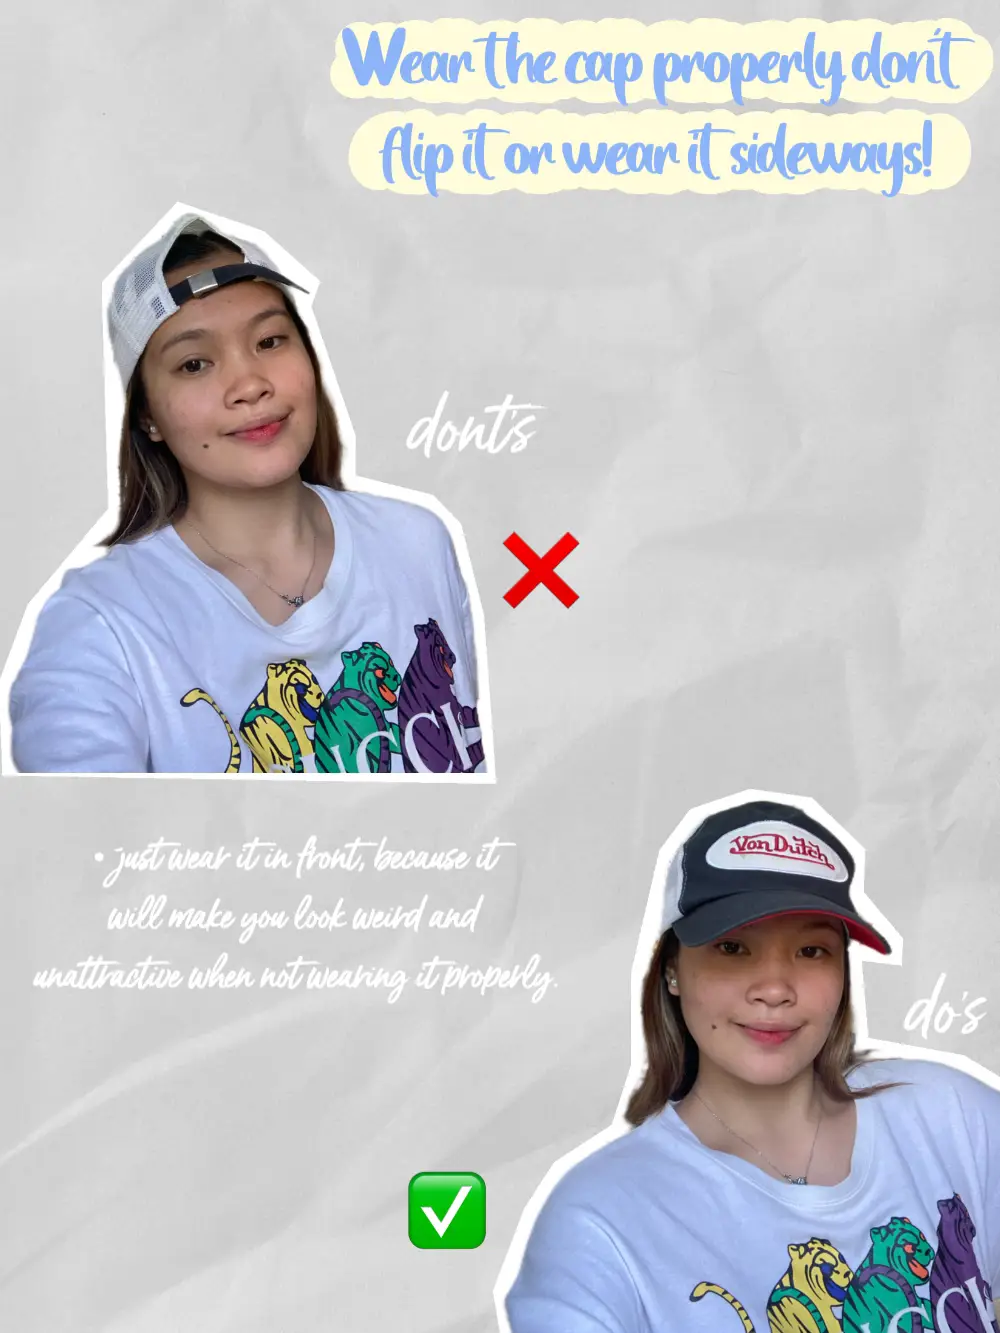 How to Wear a Baseball Cap: Do's and Don'ts